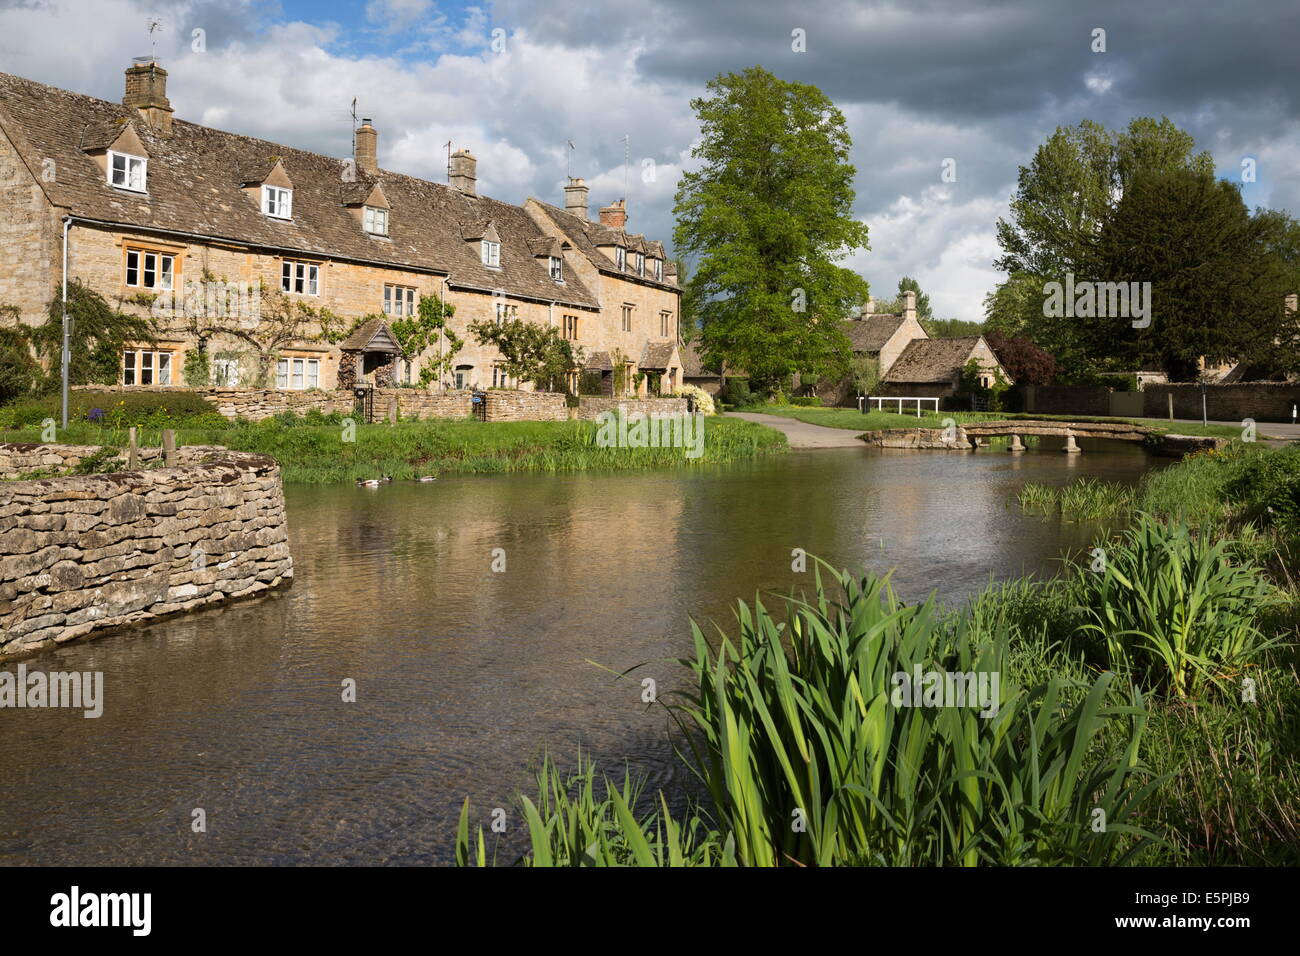 Cotswold stone cottages on the River Eye, Lower Slaughter, Cotswolds, Gloucestershire, England, United Kingdom, Europe Stock Photo